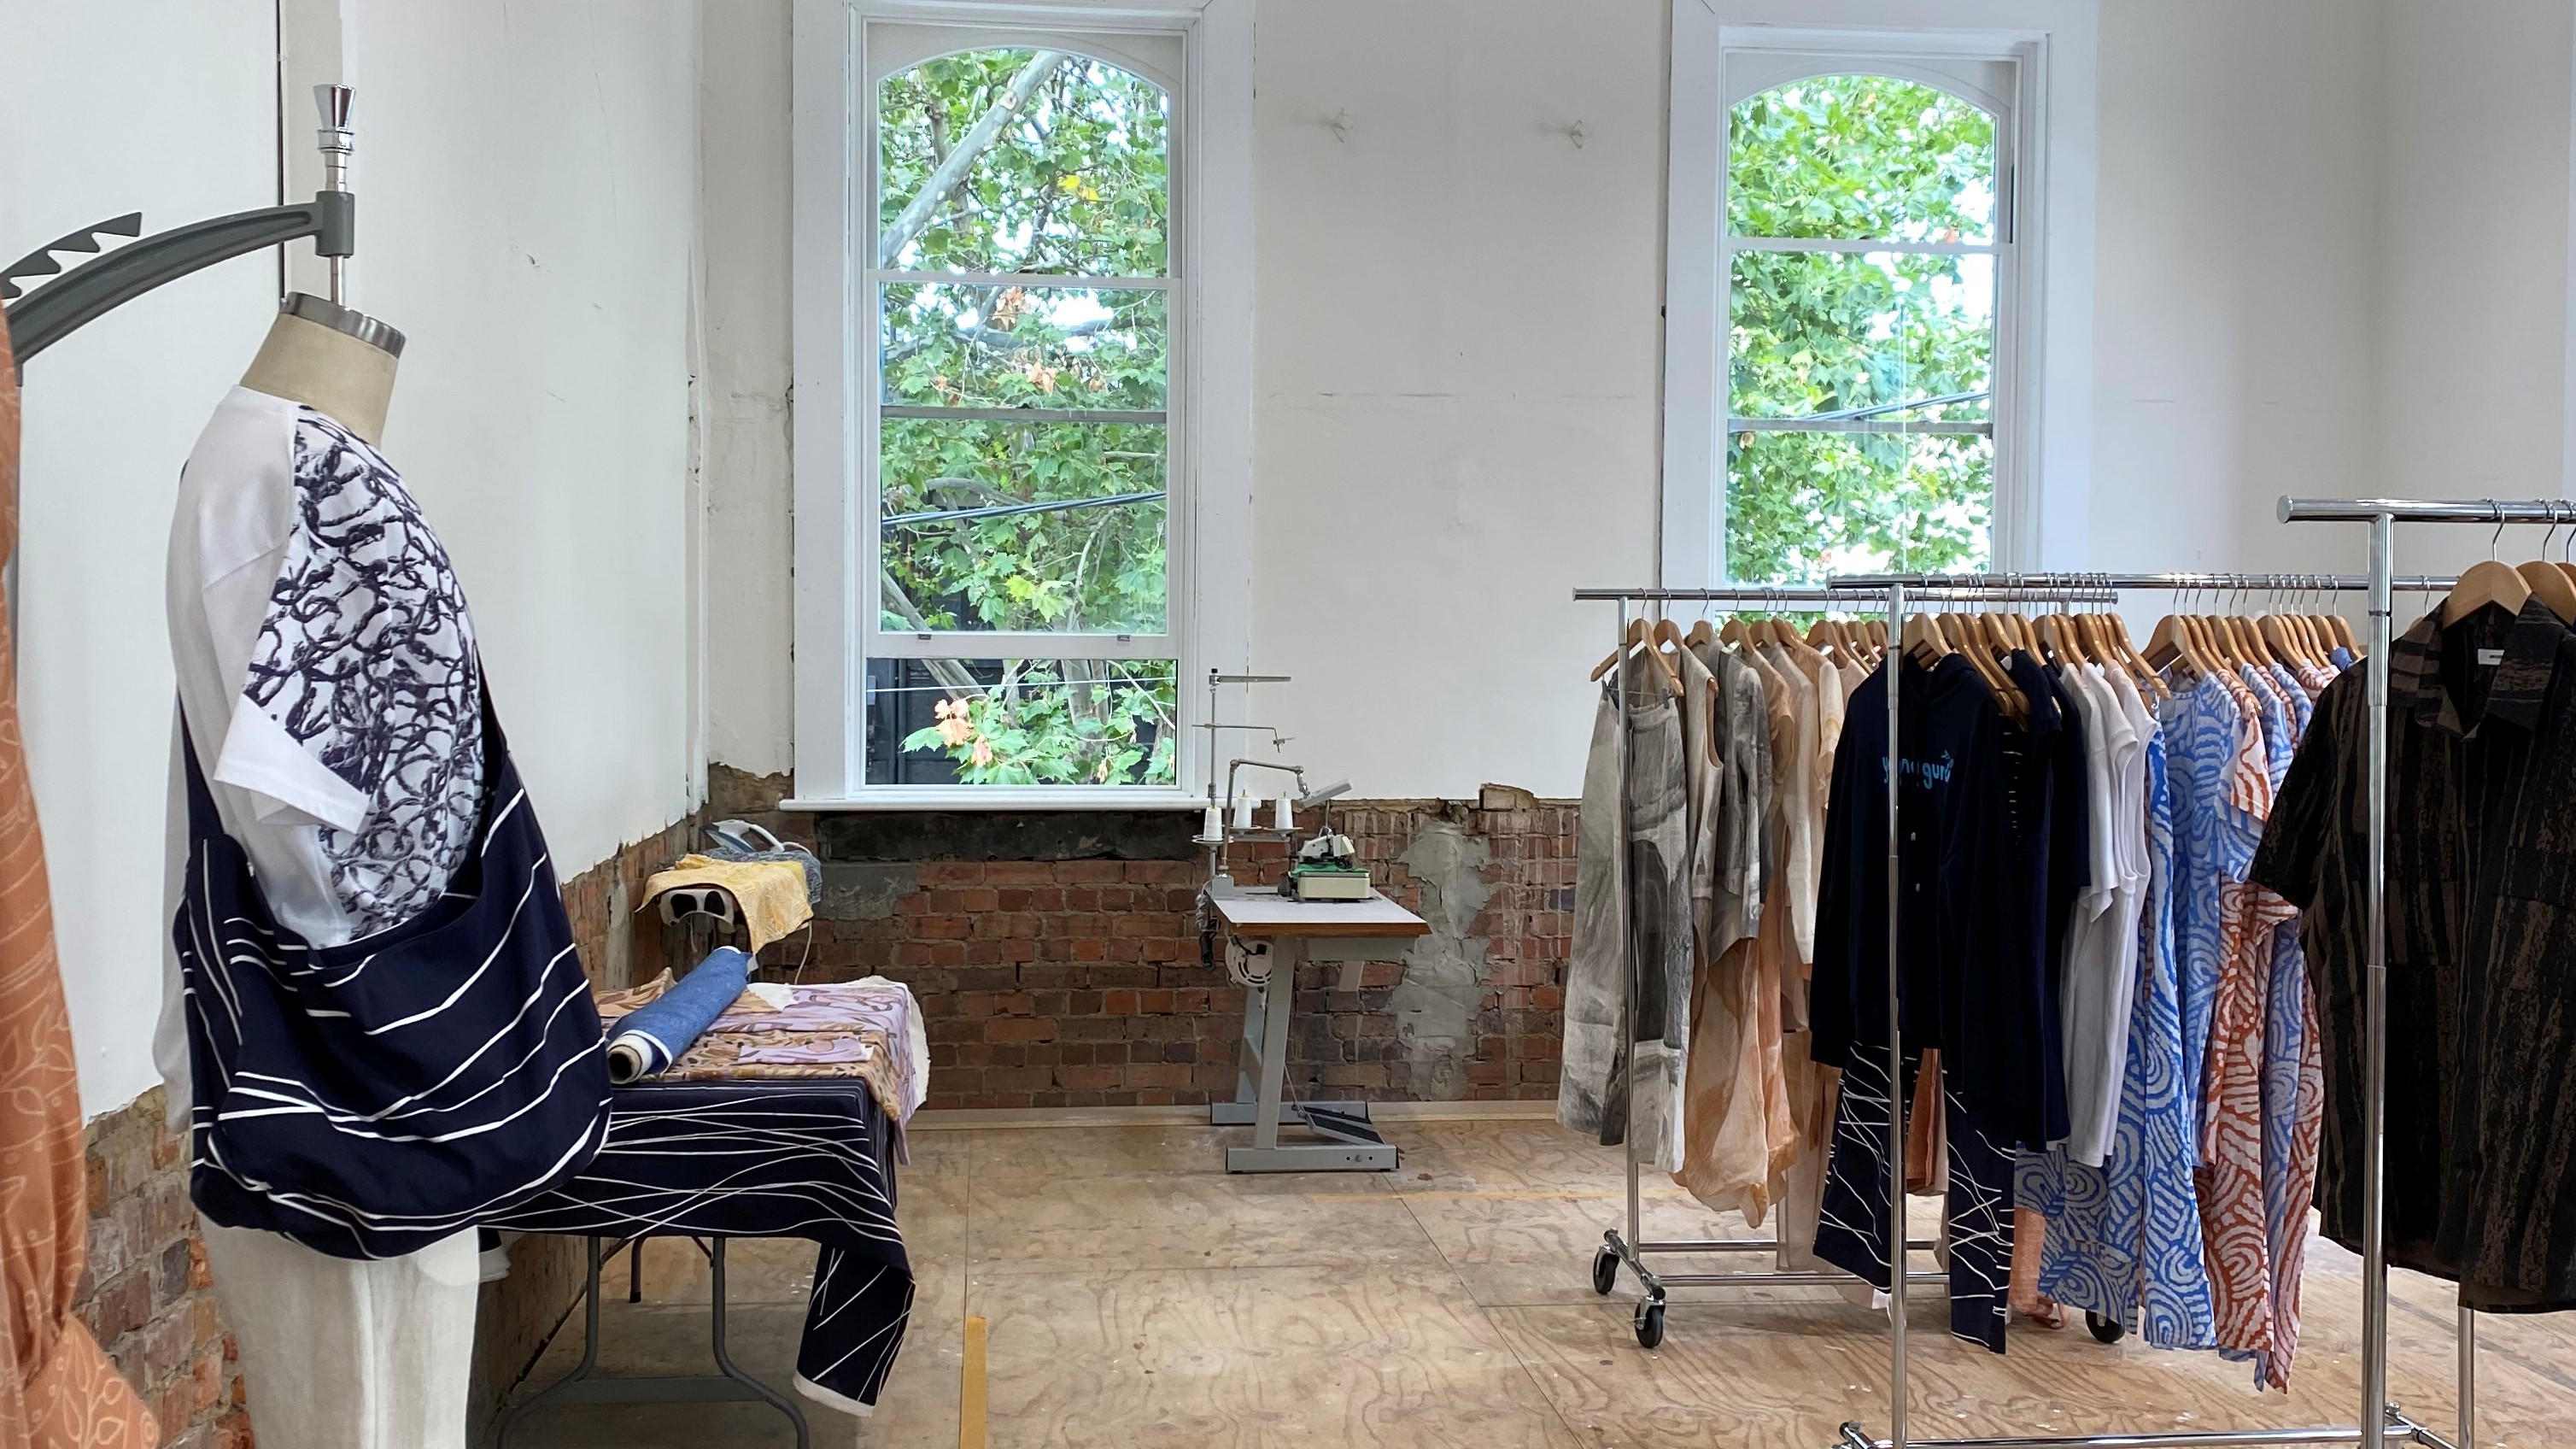 An interior view of the Kin Fashion studio, with racks of clothing and a mannequin sporting a top and bag. 